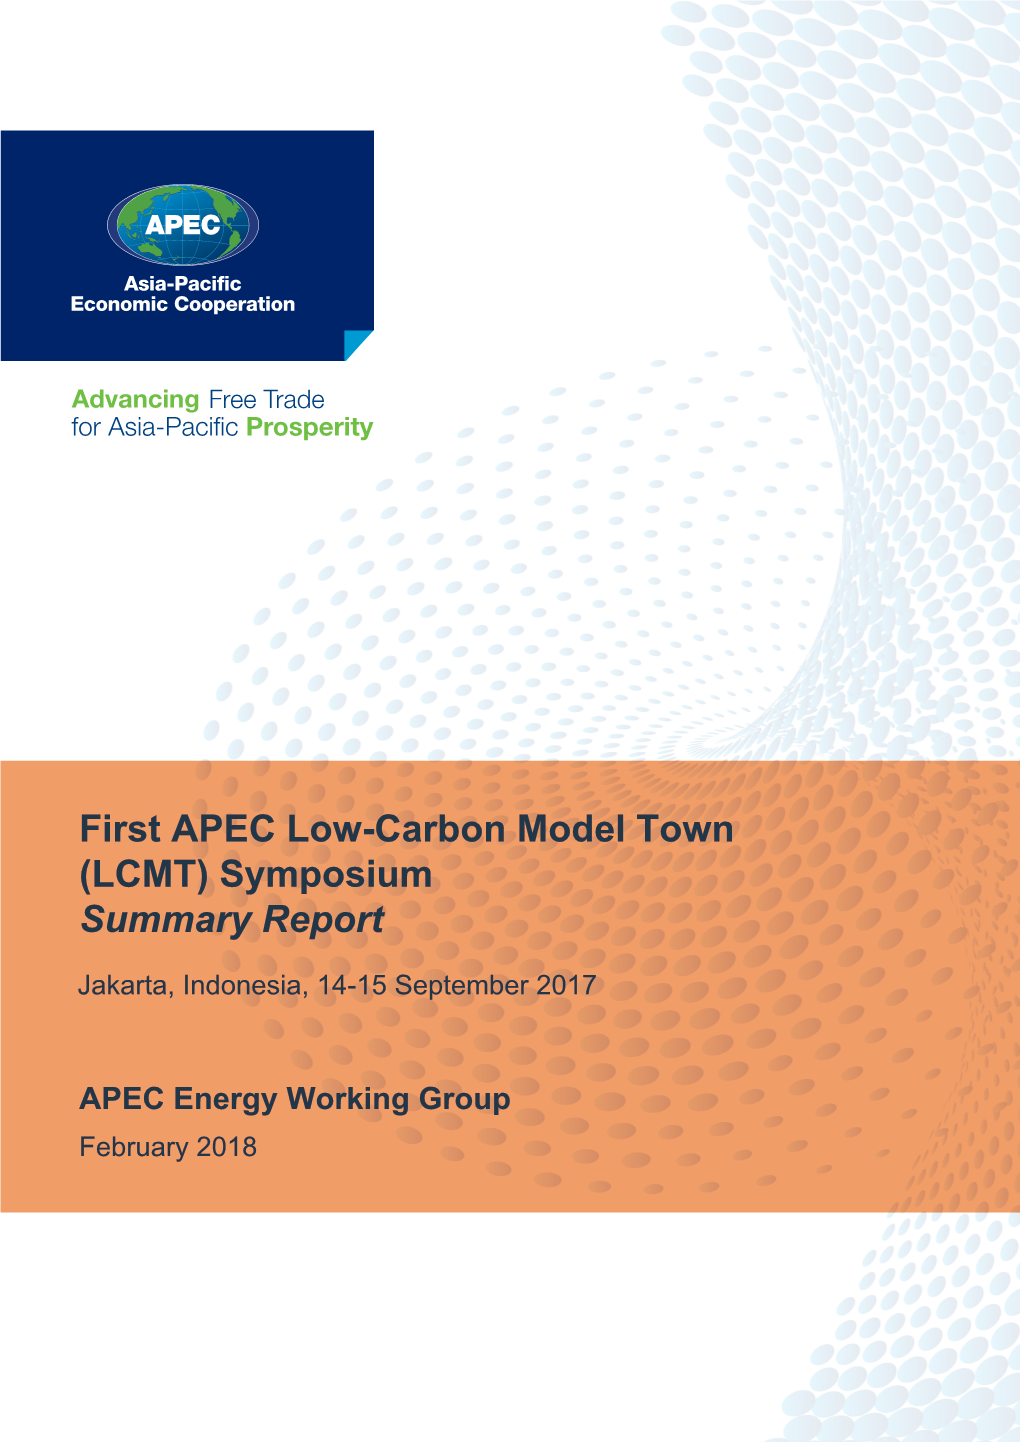 First APEC Low-Carbon Model Town (LCMT) Symposium Summary Report